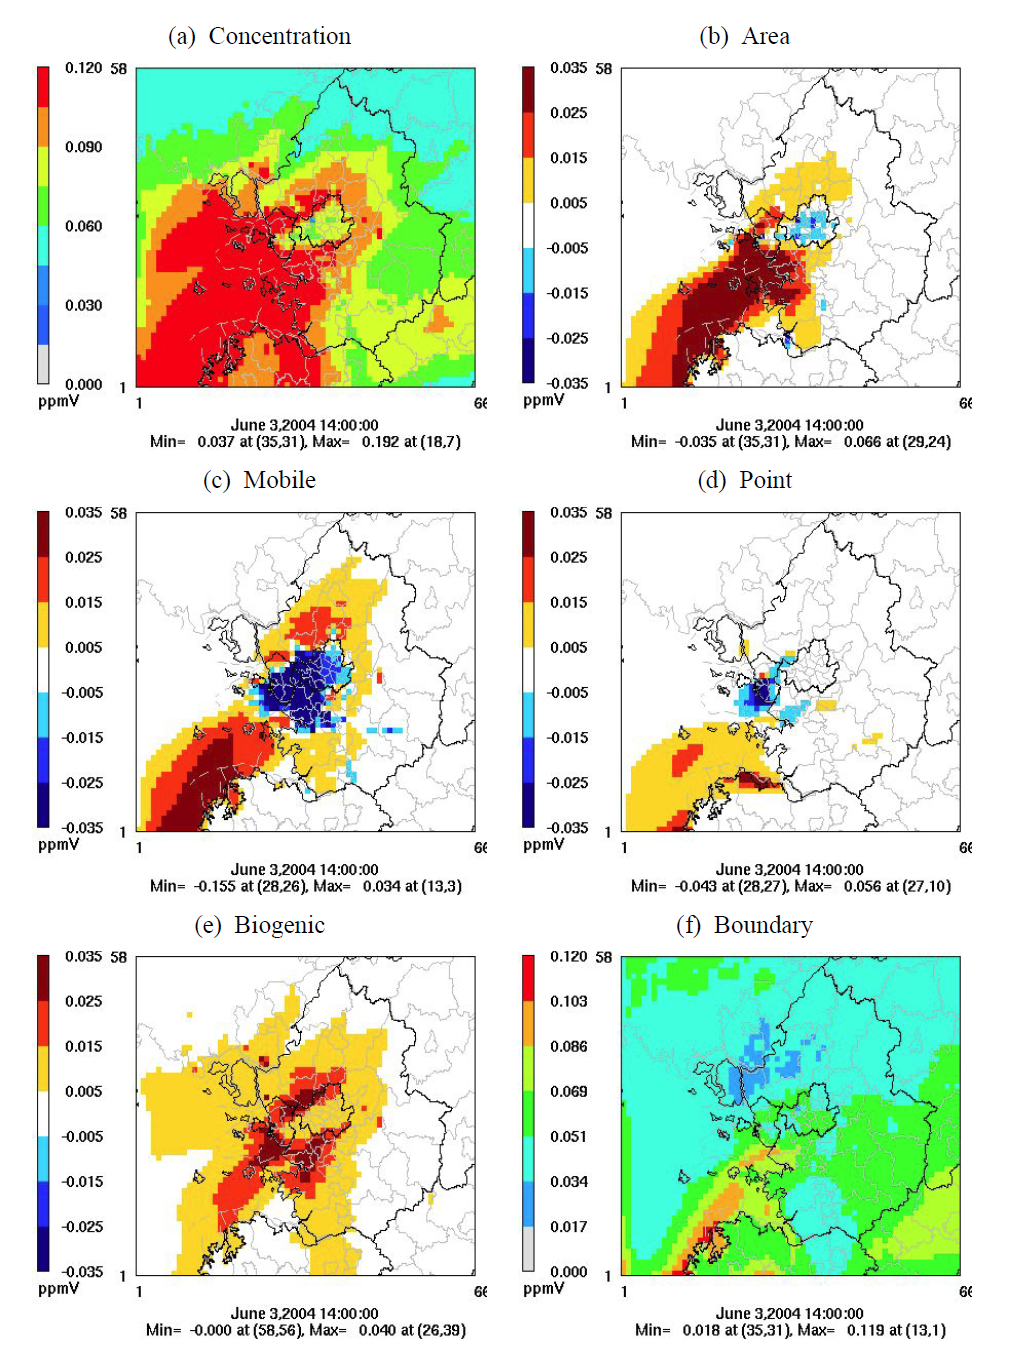 Spatial plots of (a) O3 concentration and contributions of (b) area, (c) mobile, (d) point, (e) biogenic sources, and (f) boundary conditions to O3 for June 3rd, 2004 at 14 KST